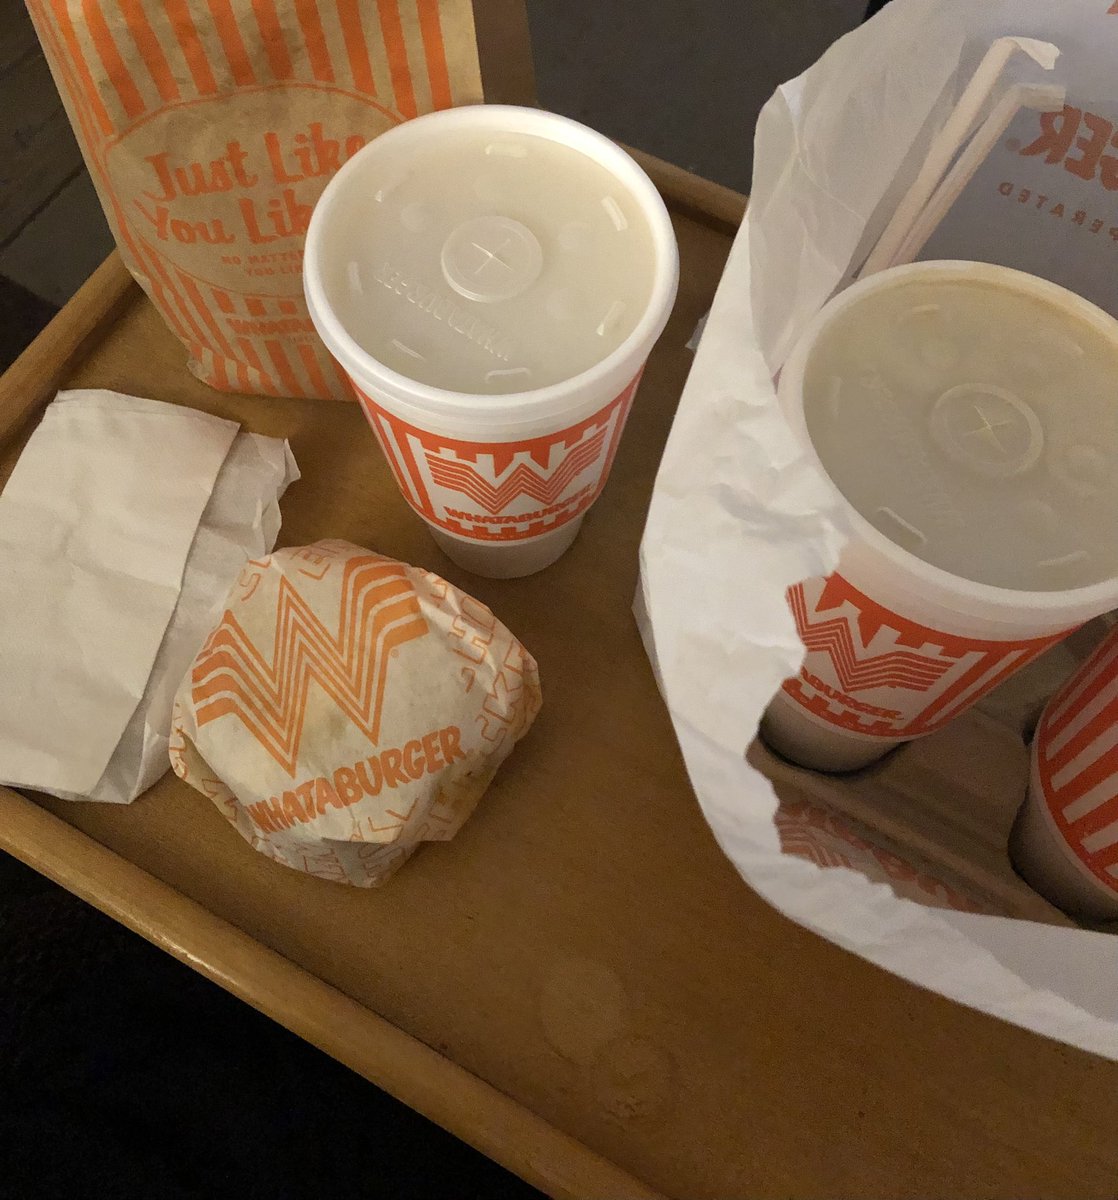 Yummy in the tummy, we went to Whataburger! There is still time to visit the Whataburger at 1310 George Dieter. Don’t forget to mention John Drugan when you order, either through the drive-through or inside.#JDS #Whataburger #TeamSISD #Parentandfamilyengagement